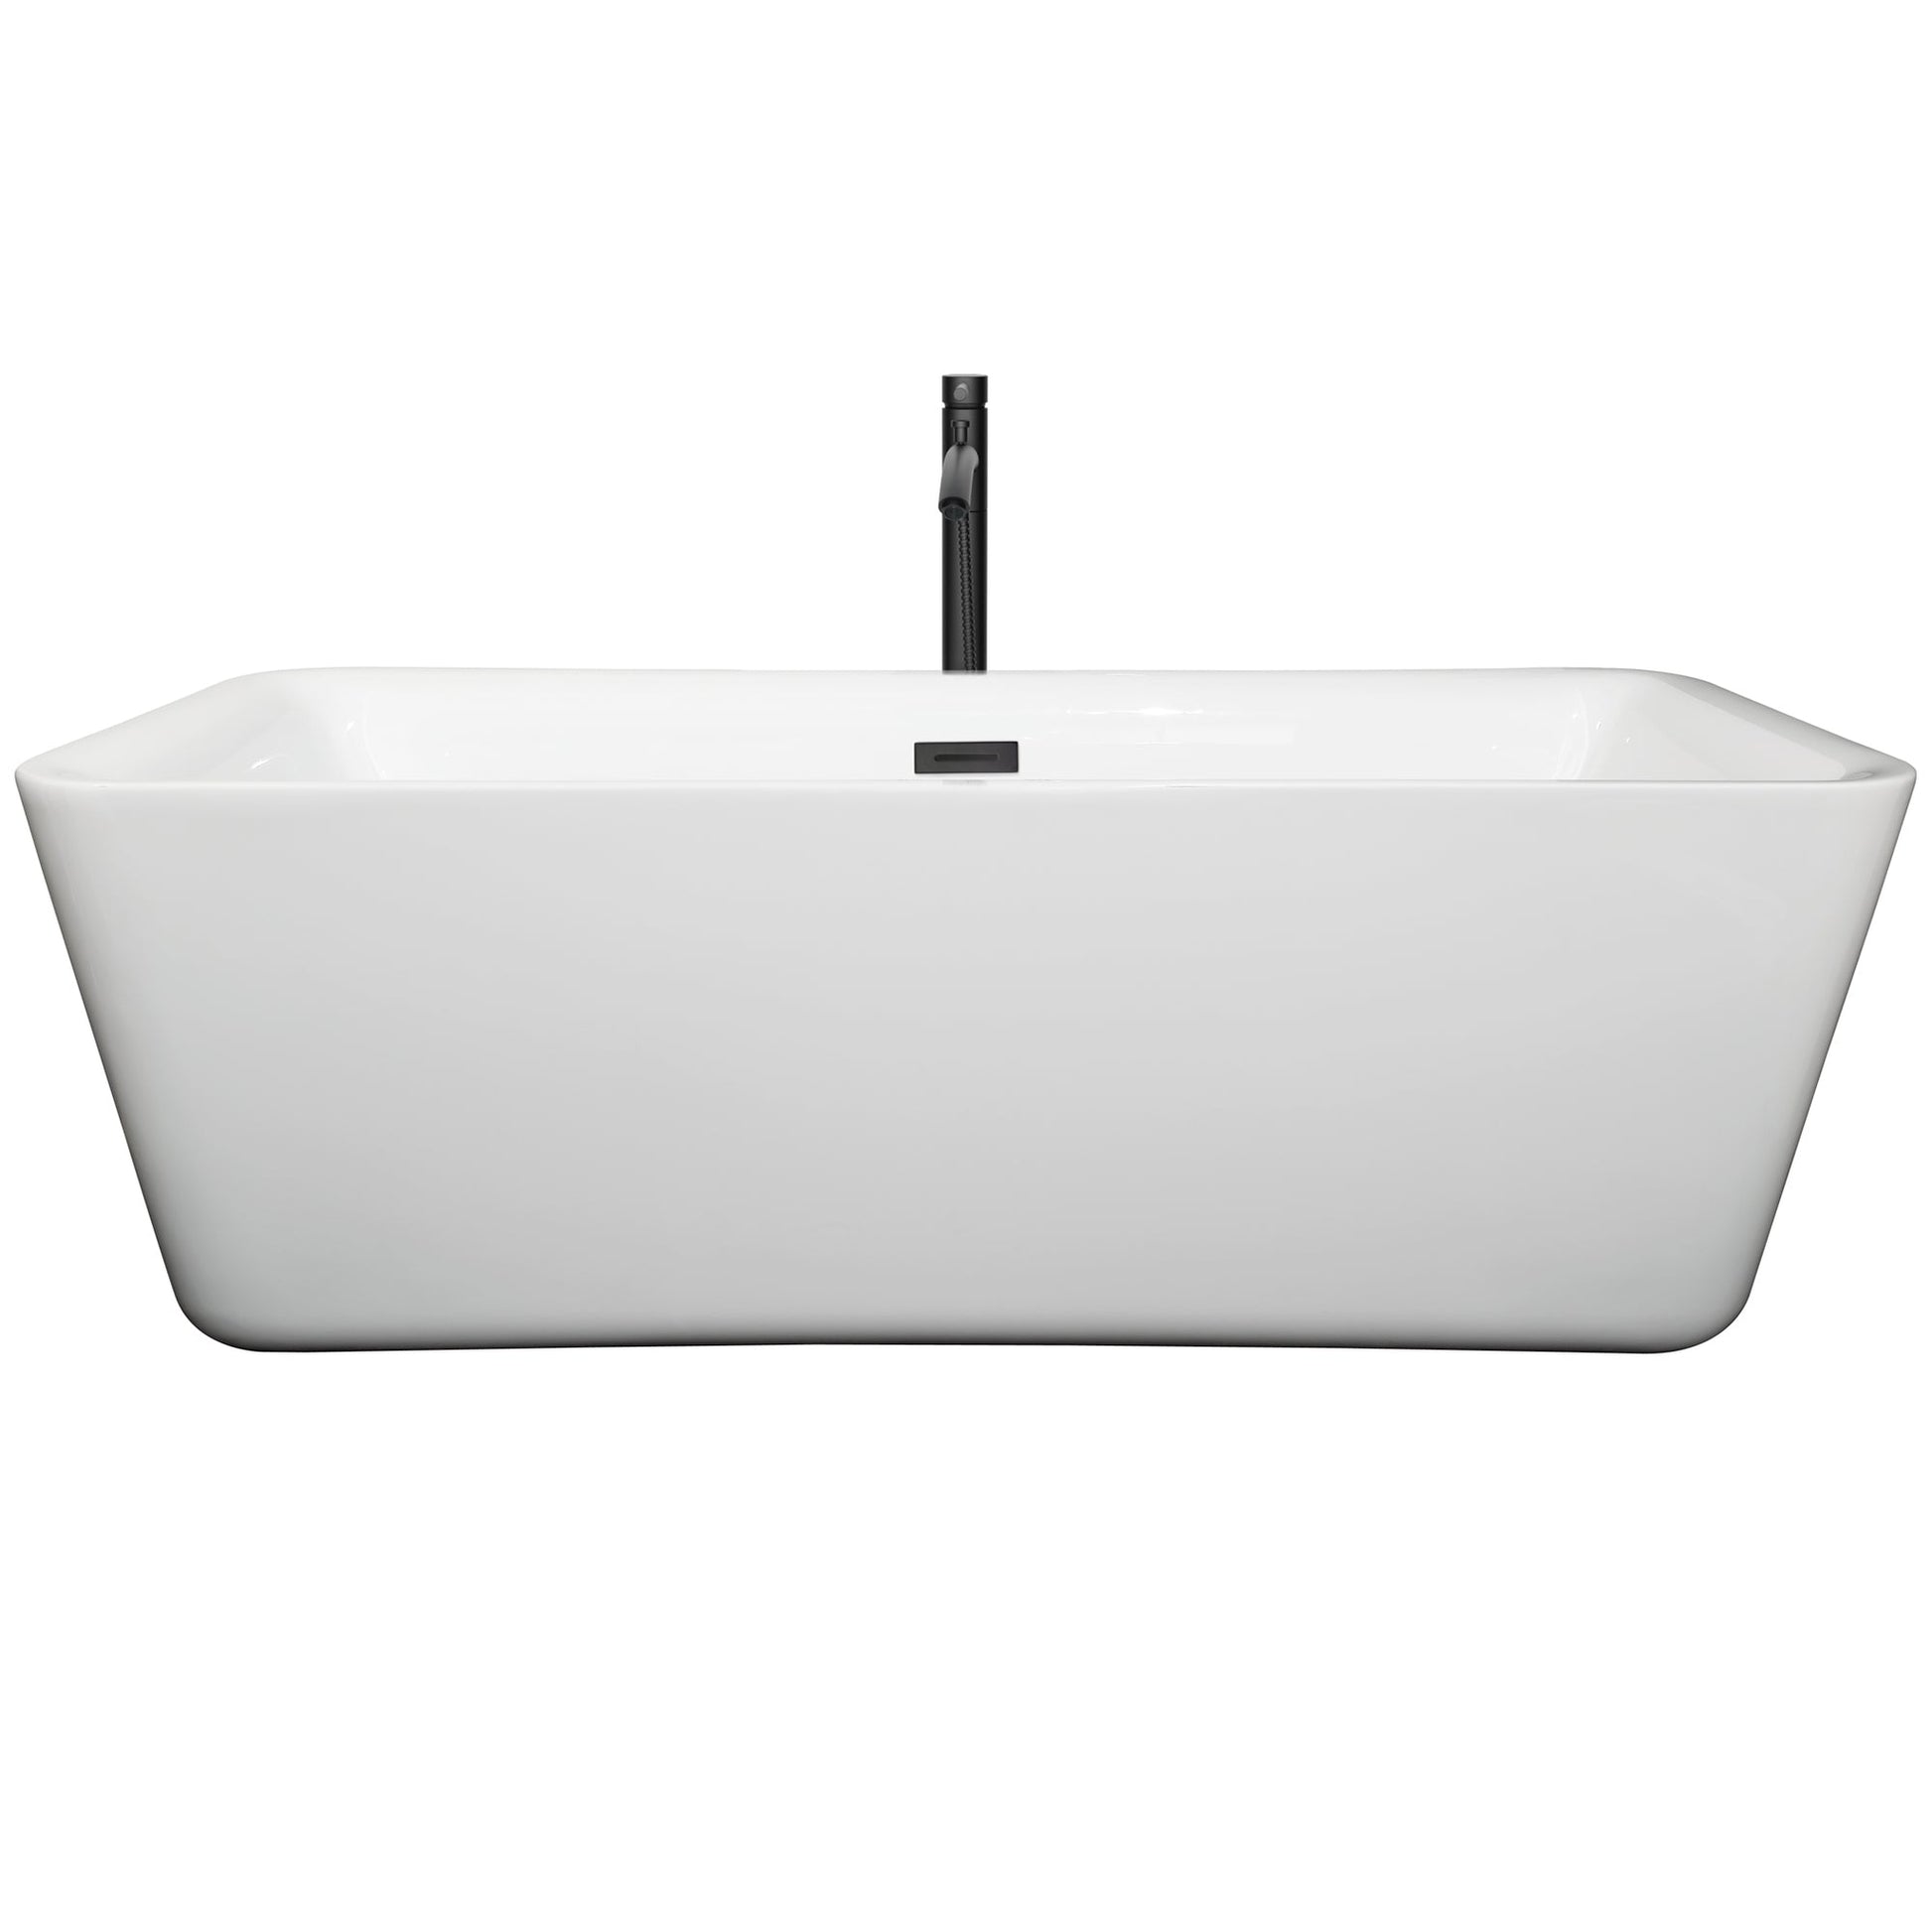 Wyndham Collection Emily 69" Freestanding Bathtub in White With Floor Mounted Faucet, Drain and Overflow Trim in Matte Black